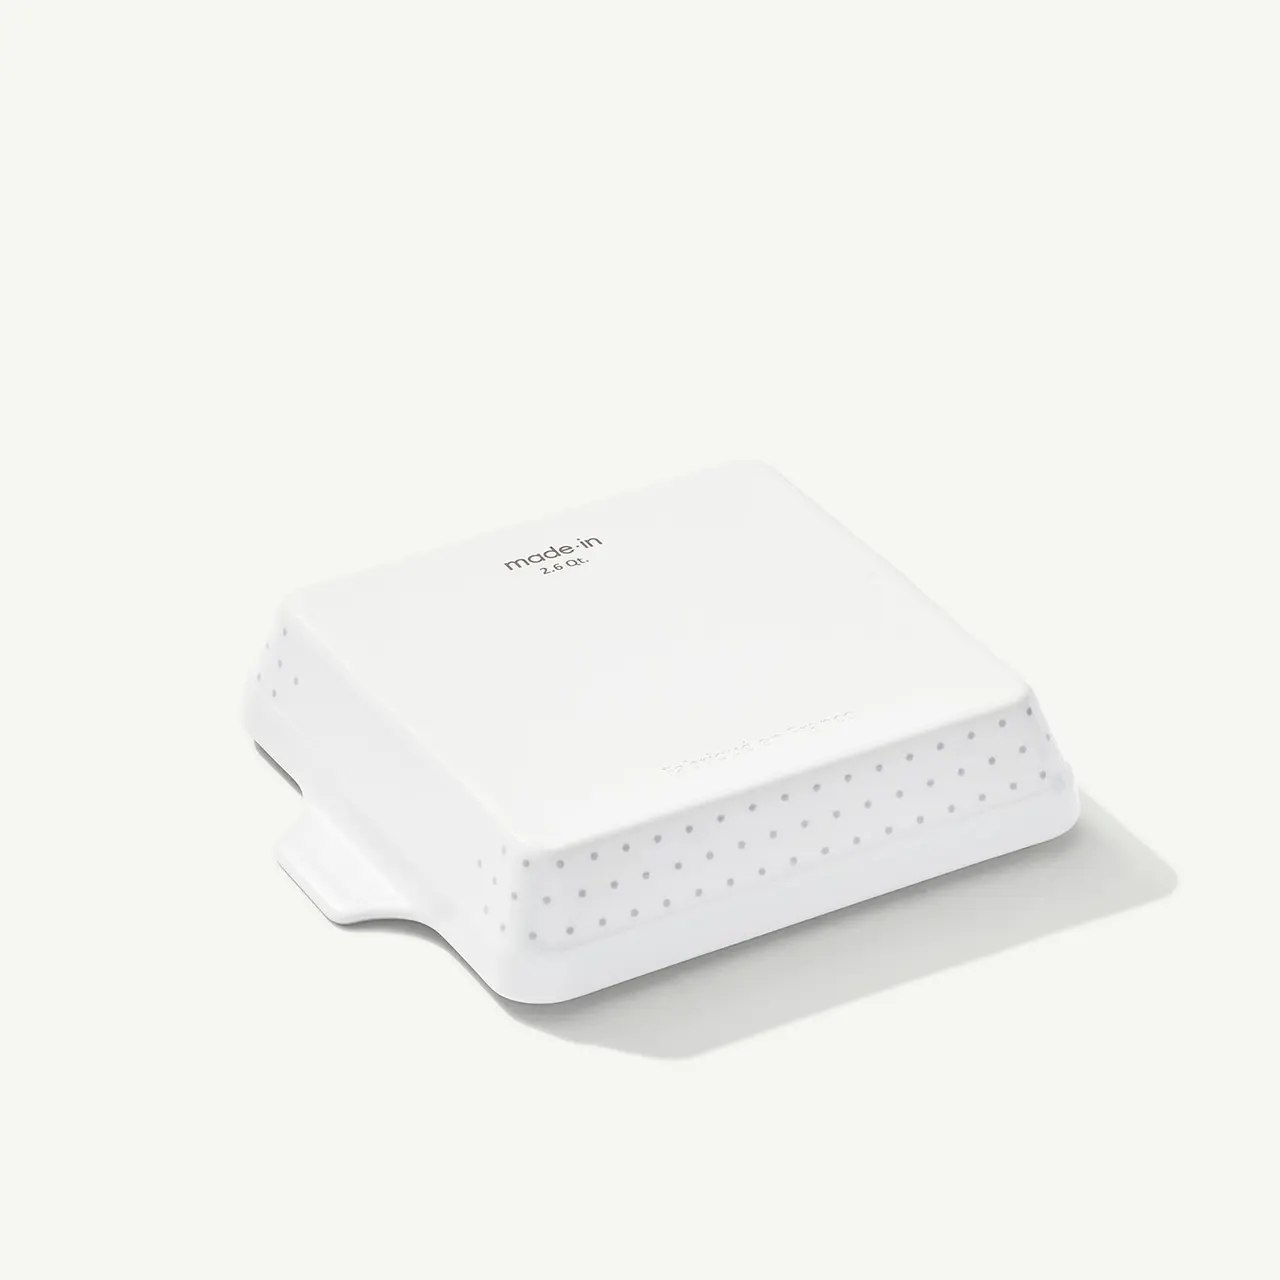 A white wireless router with visible brand and model information on a simple background.